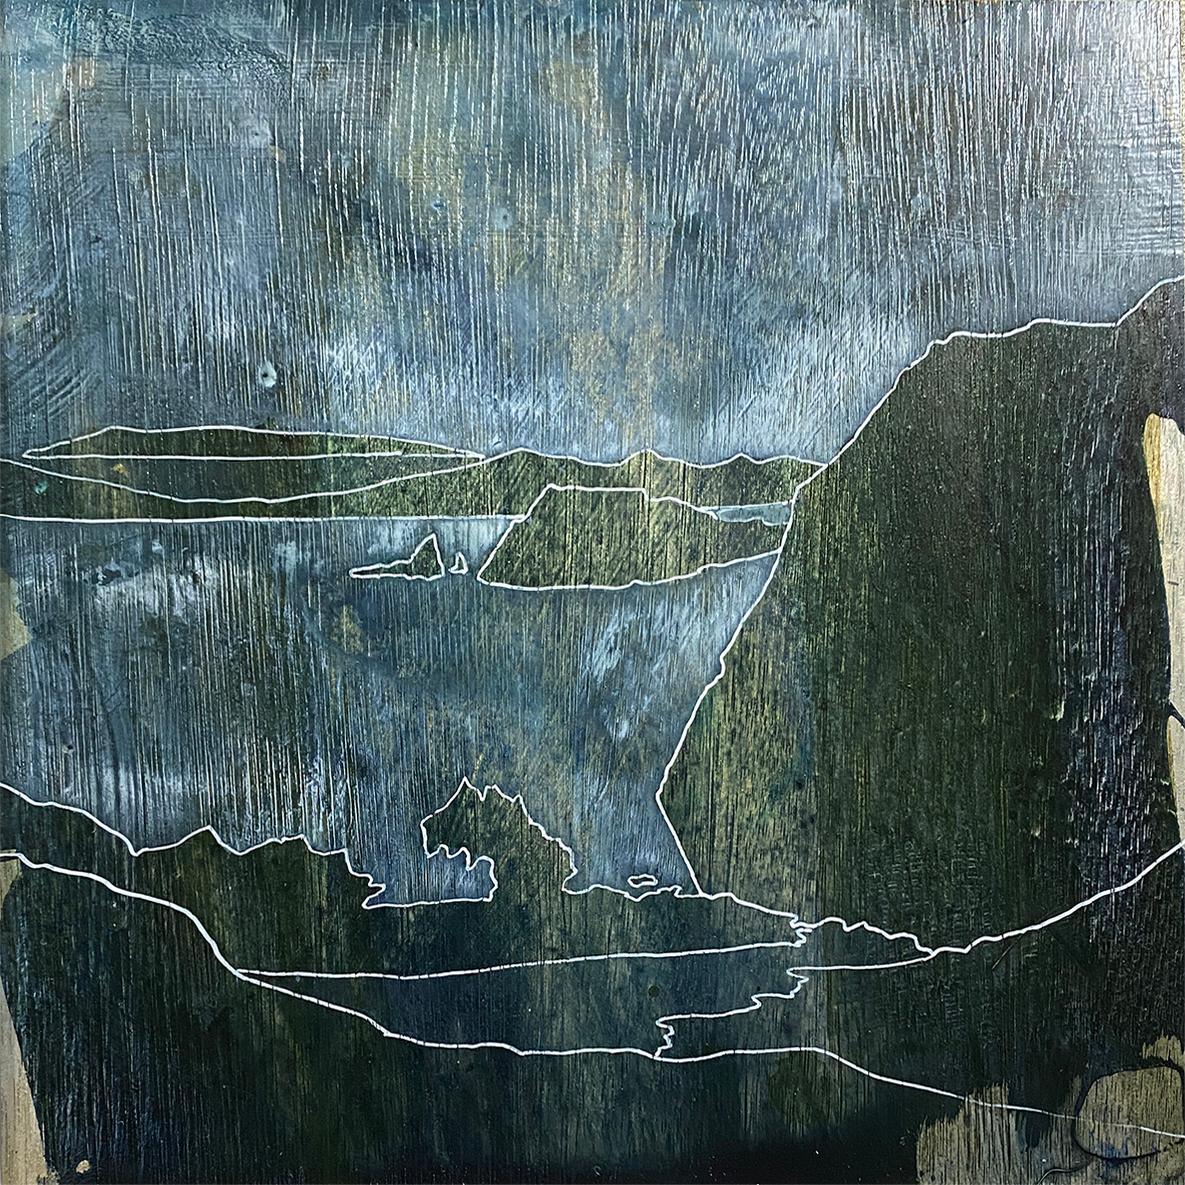 A painting inspired by Scottish landscapes, the view onto a loch, abstracted with line and texture created by the application of multiple layers over a soft gold background colour. "I love the idea of suggesting a landscape to a viewer and then